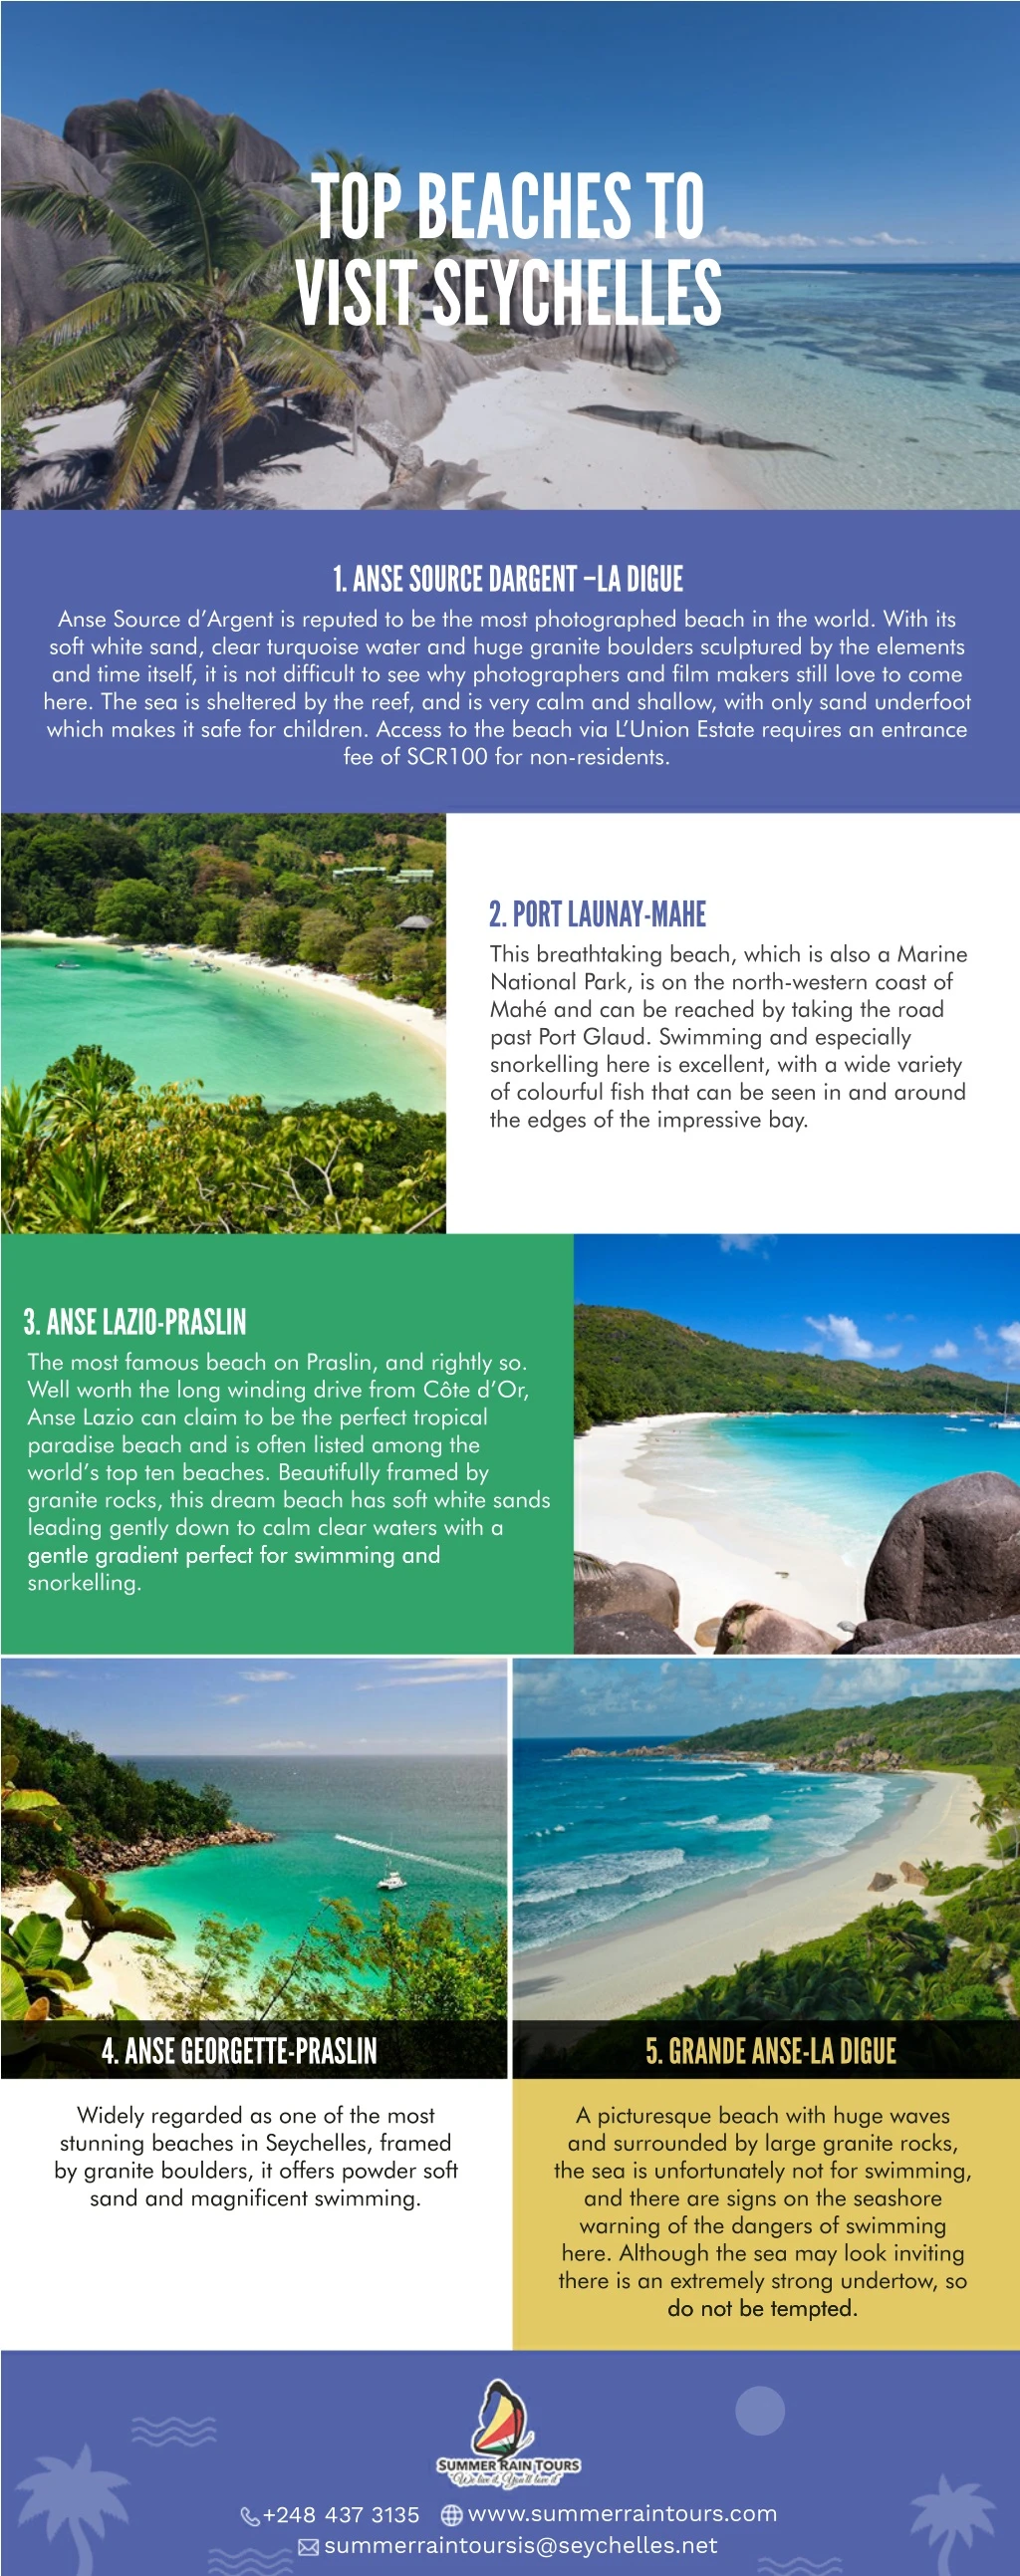 top beaches to visit seychelles